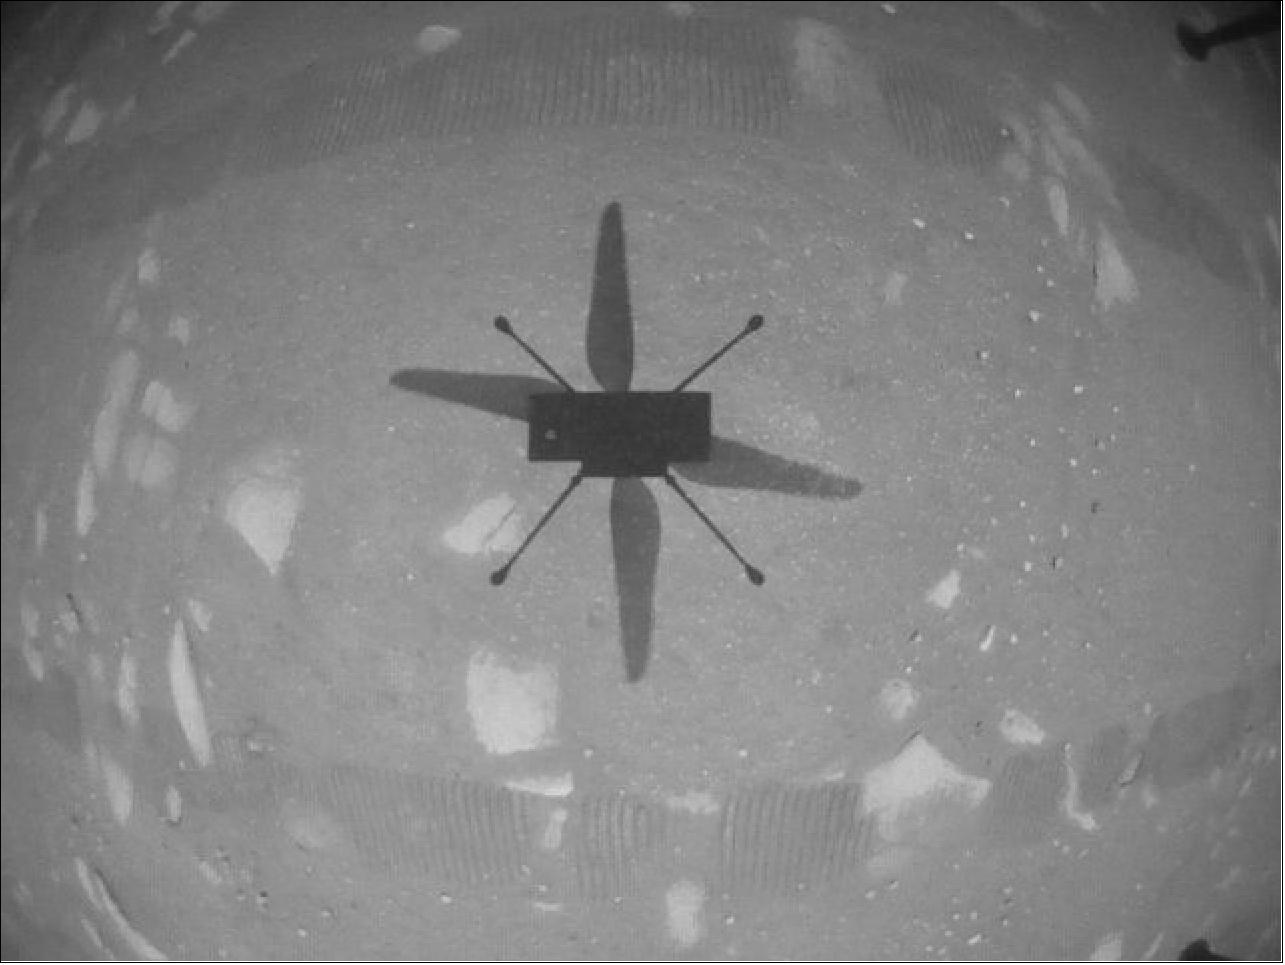 Figure 36: NASA's Ingenuity Mars Helicopter took this shot, capturing its own shadow, while hovering over the Martian surface on April 19, 2021, during the first instance of powered, controlled flight on another planet. It used its navigation camera, which autonomously tracks the ground during flight (image credit: NASA/JPL-Caltech)